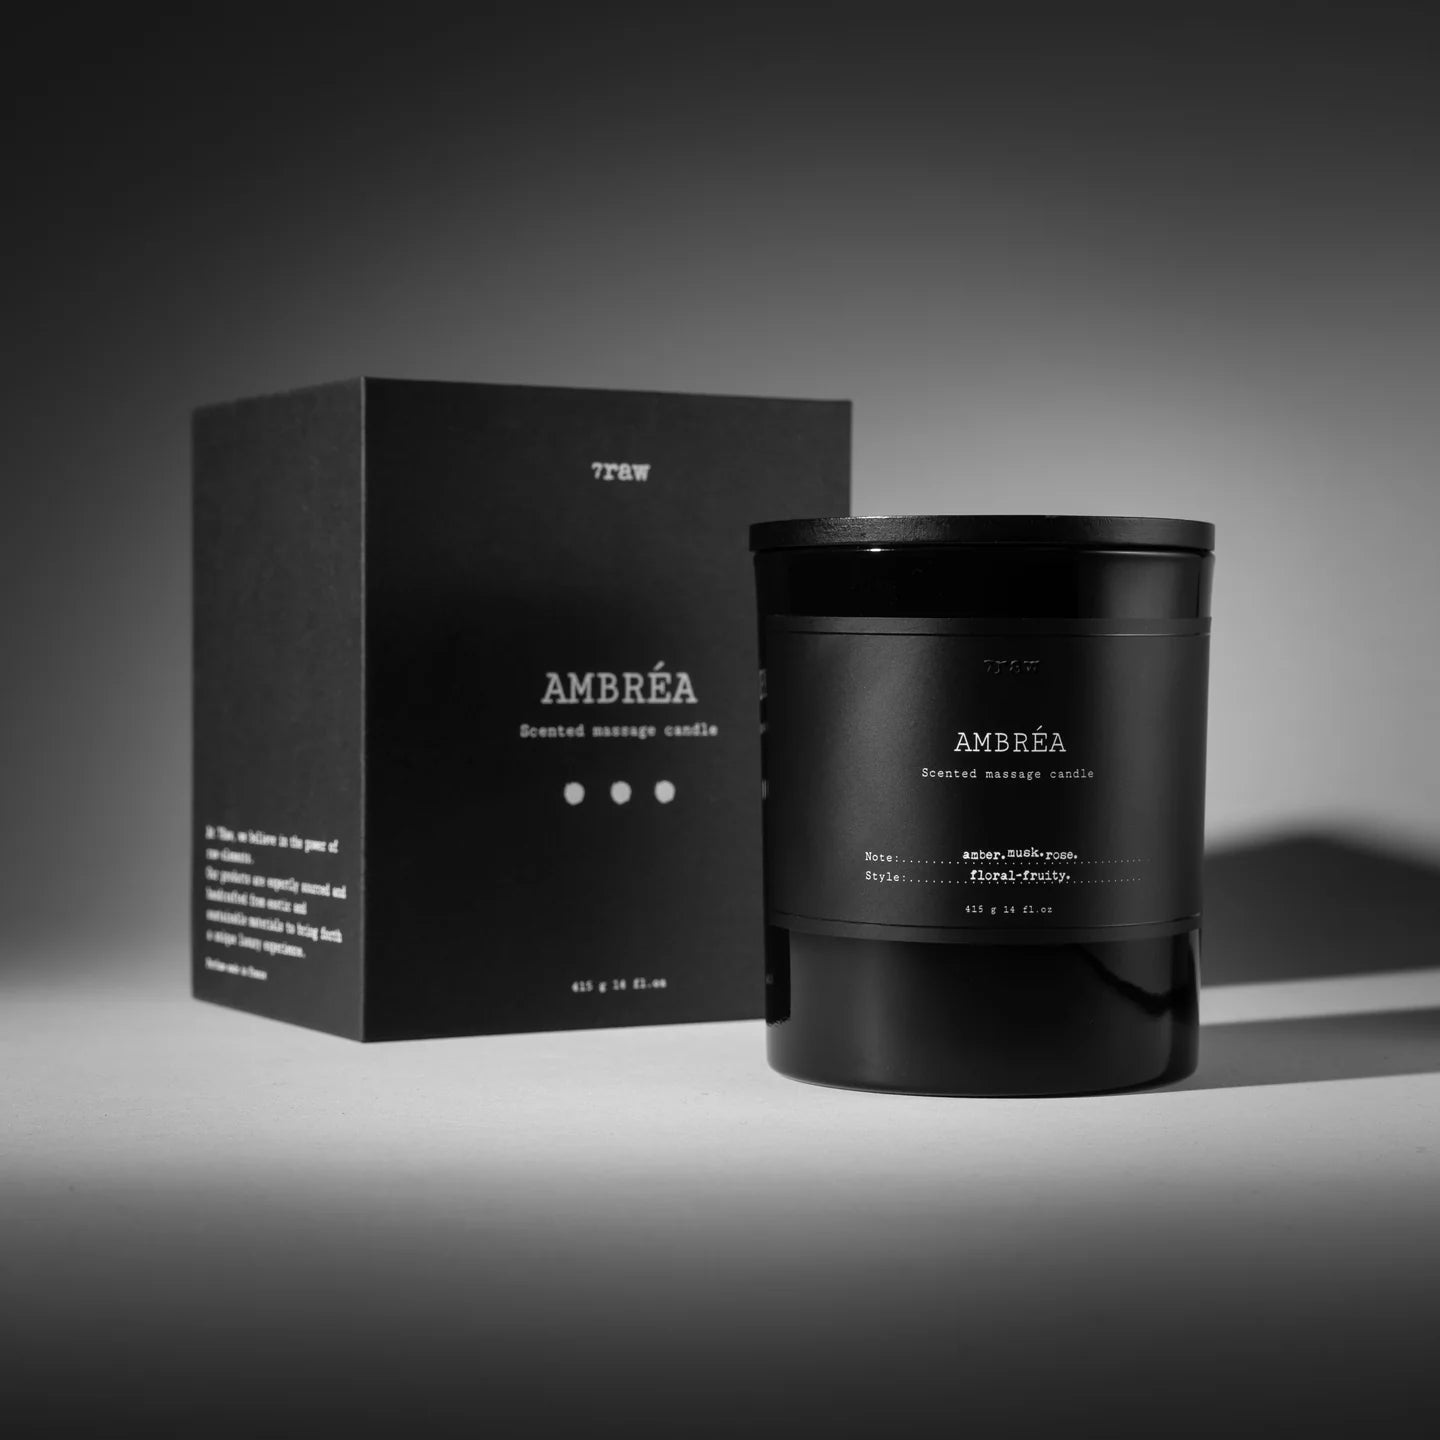 AMBRÉA SCENTED MASSAGE CANDLE